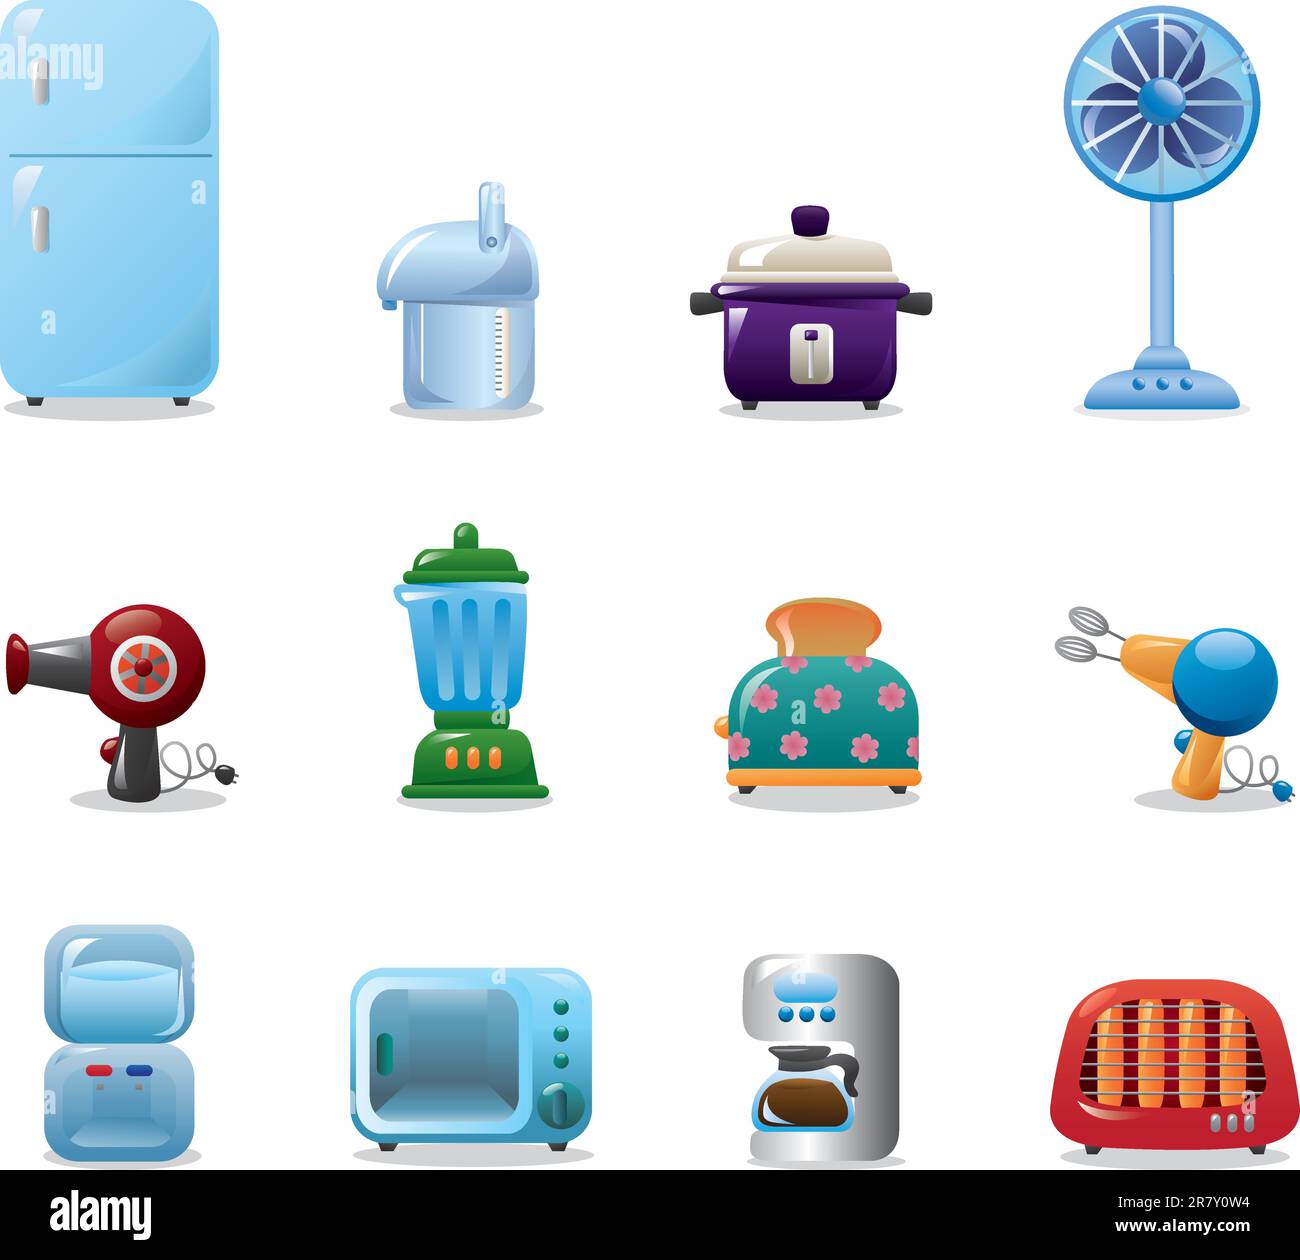 home appliances icons Stock Vector